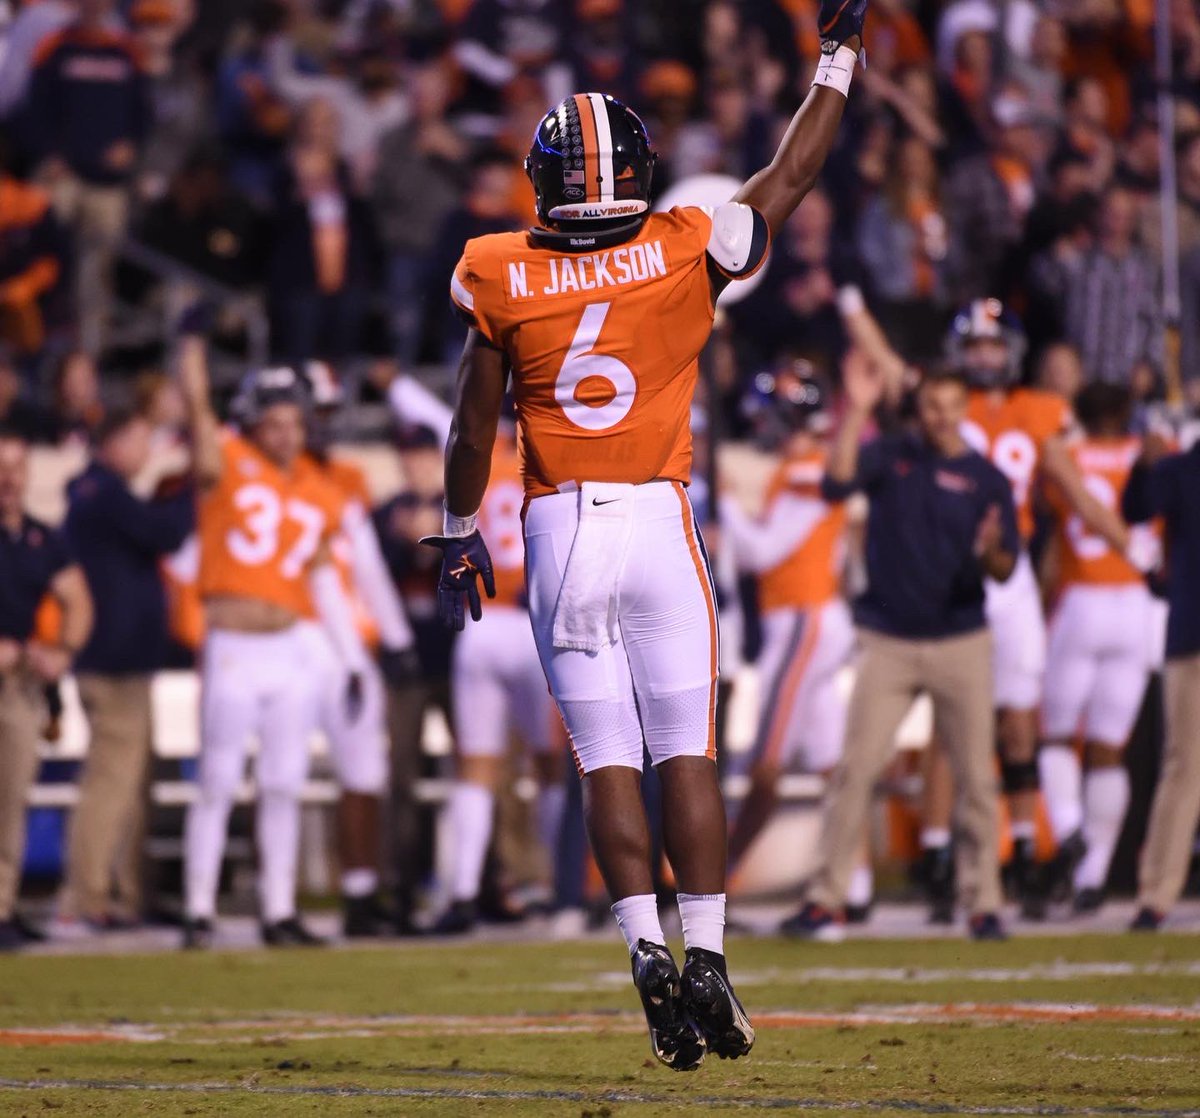 To my teammates, coaches, staff, alumni, Charlottesville community, and fans it has been an honor to represent @UVAFootball. I am forever in debt. Cville will always be home for me. I can’t thank you all enough for the past 4 years of support as I move on to the next chapter🧡💙